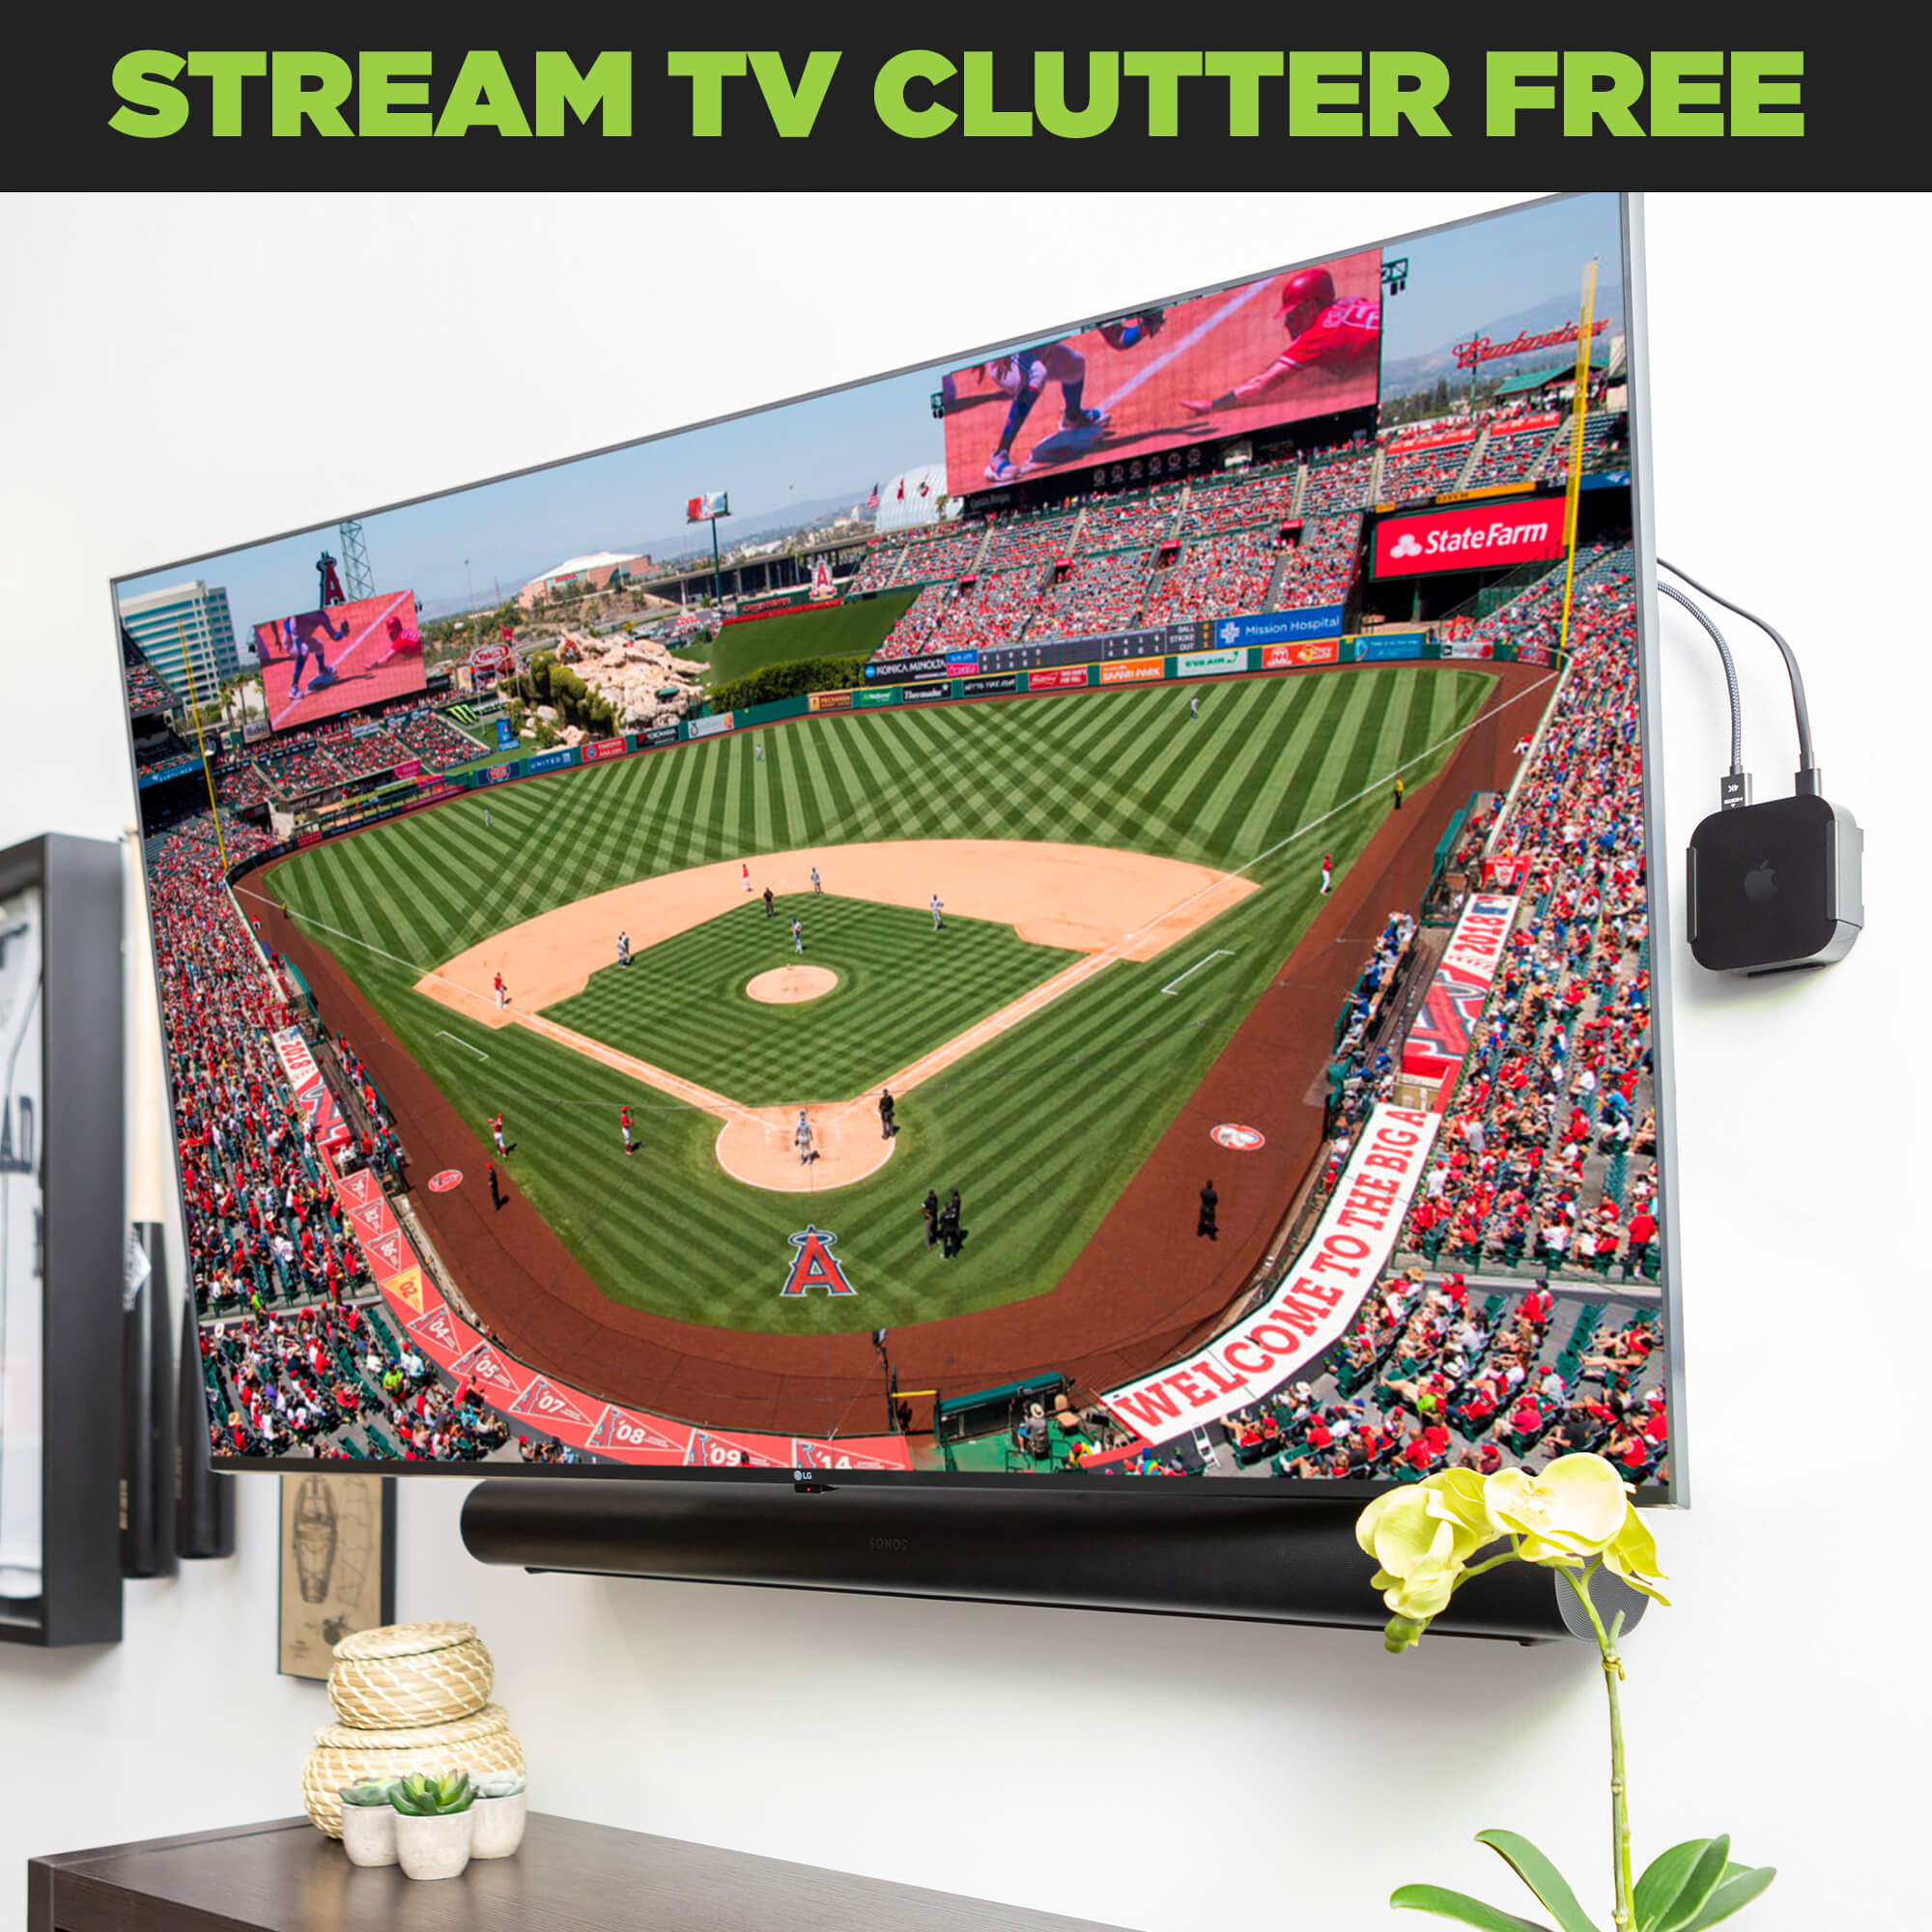 Stream TV clutter free and wall mount the Apple TV 4K 3rd Gen in a HIDEit Mount.